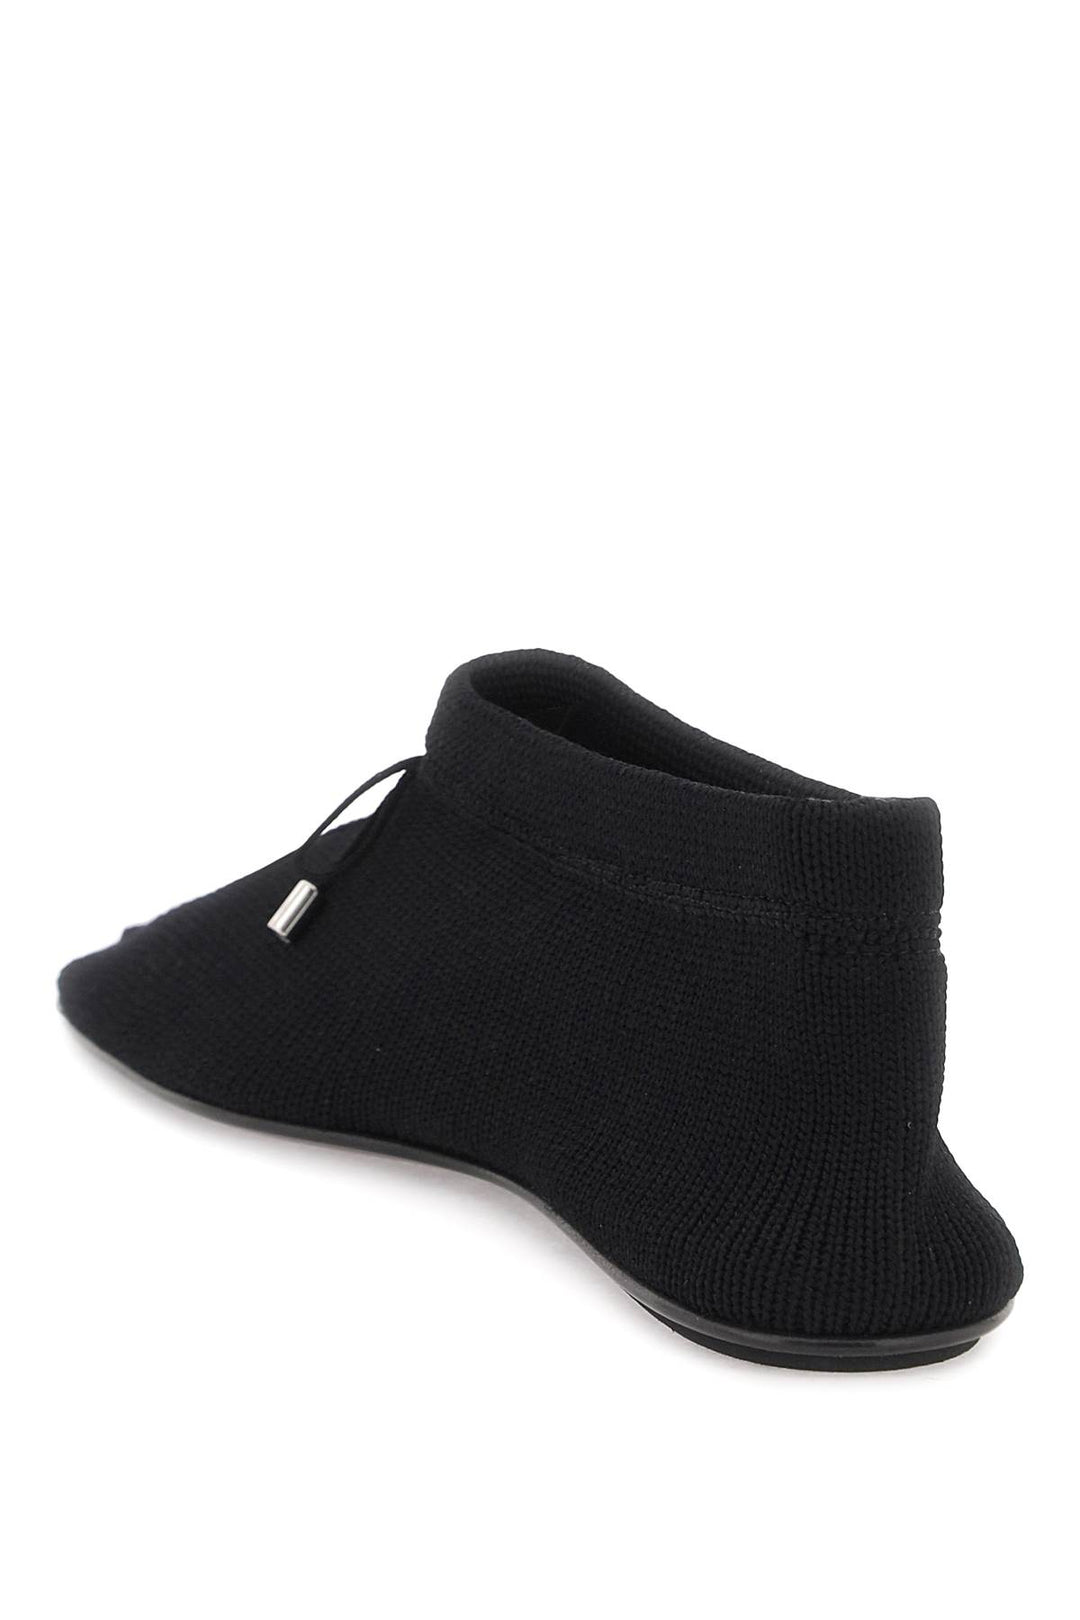 Toteme Knitted Ballet Flats   Black